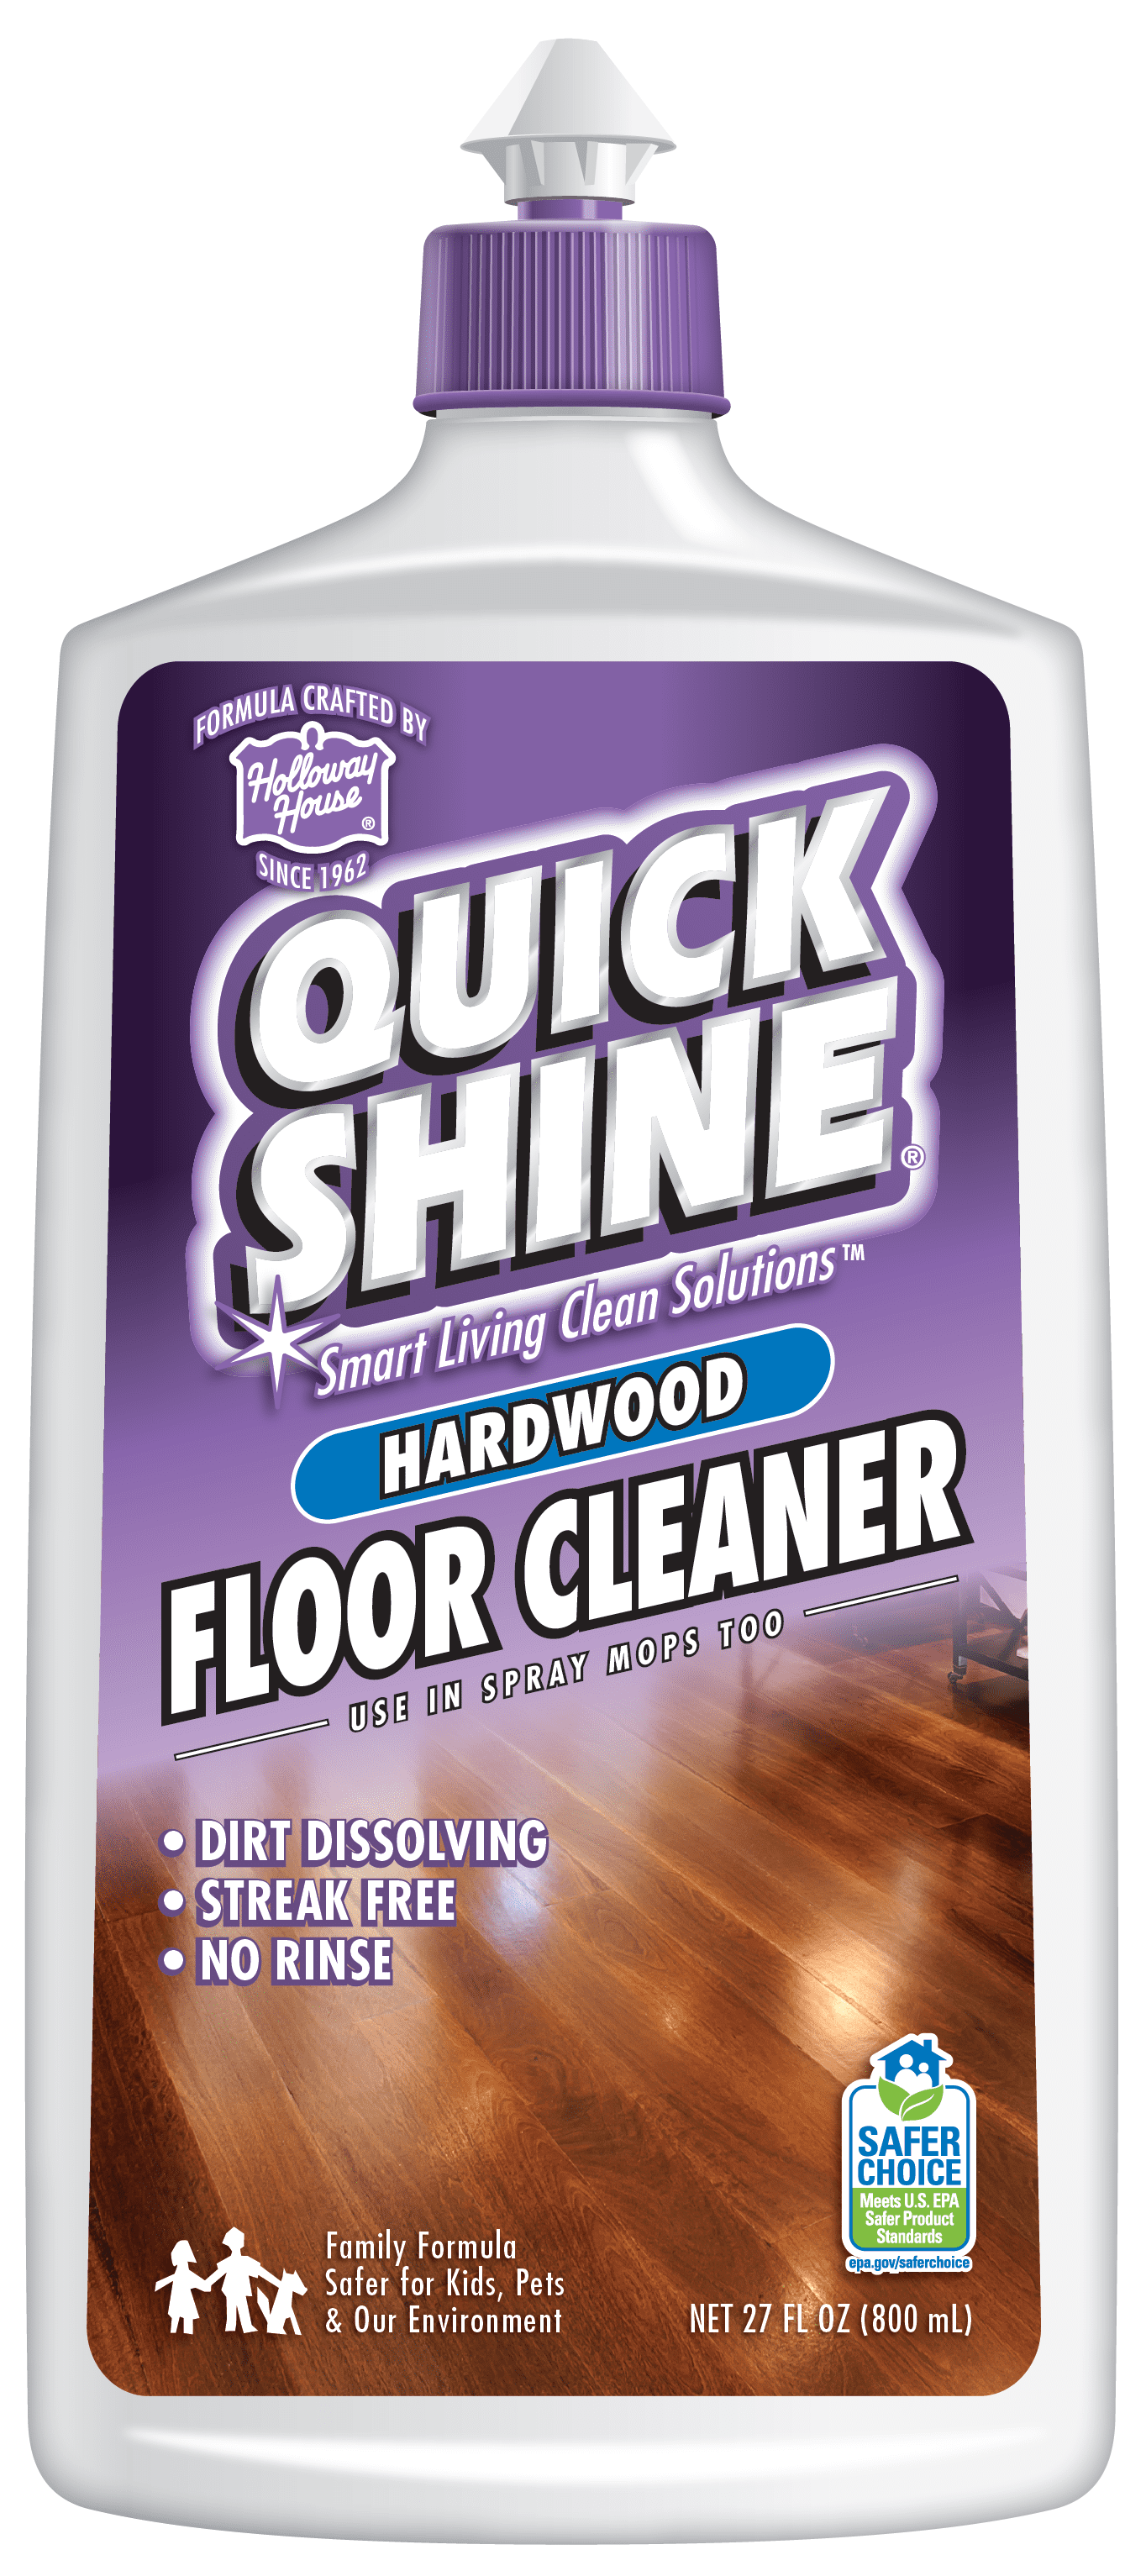 wood floor cleaning products